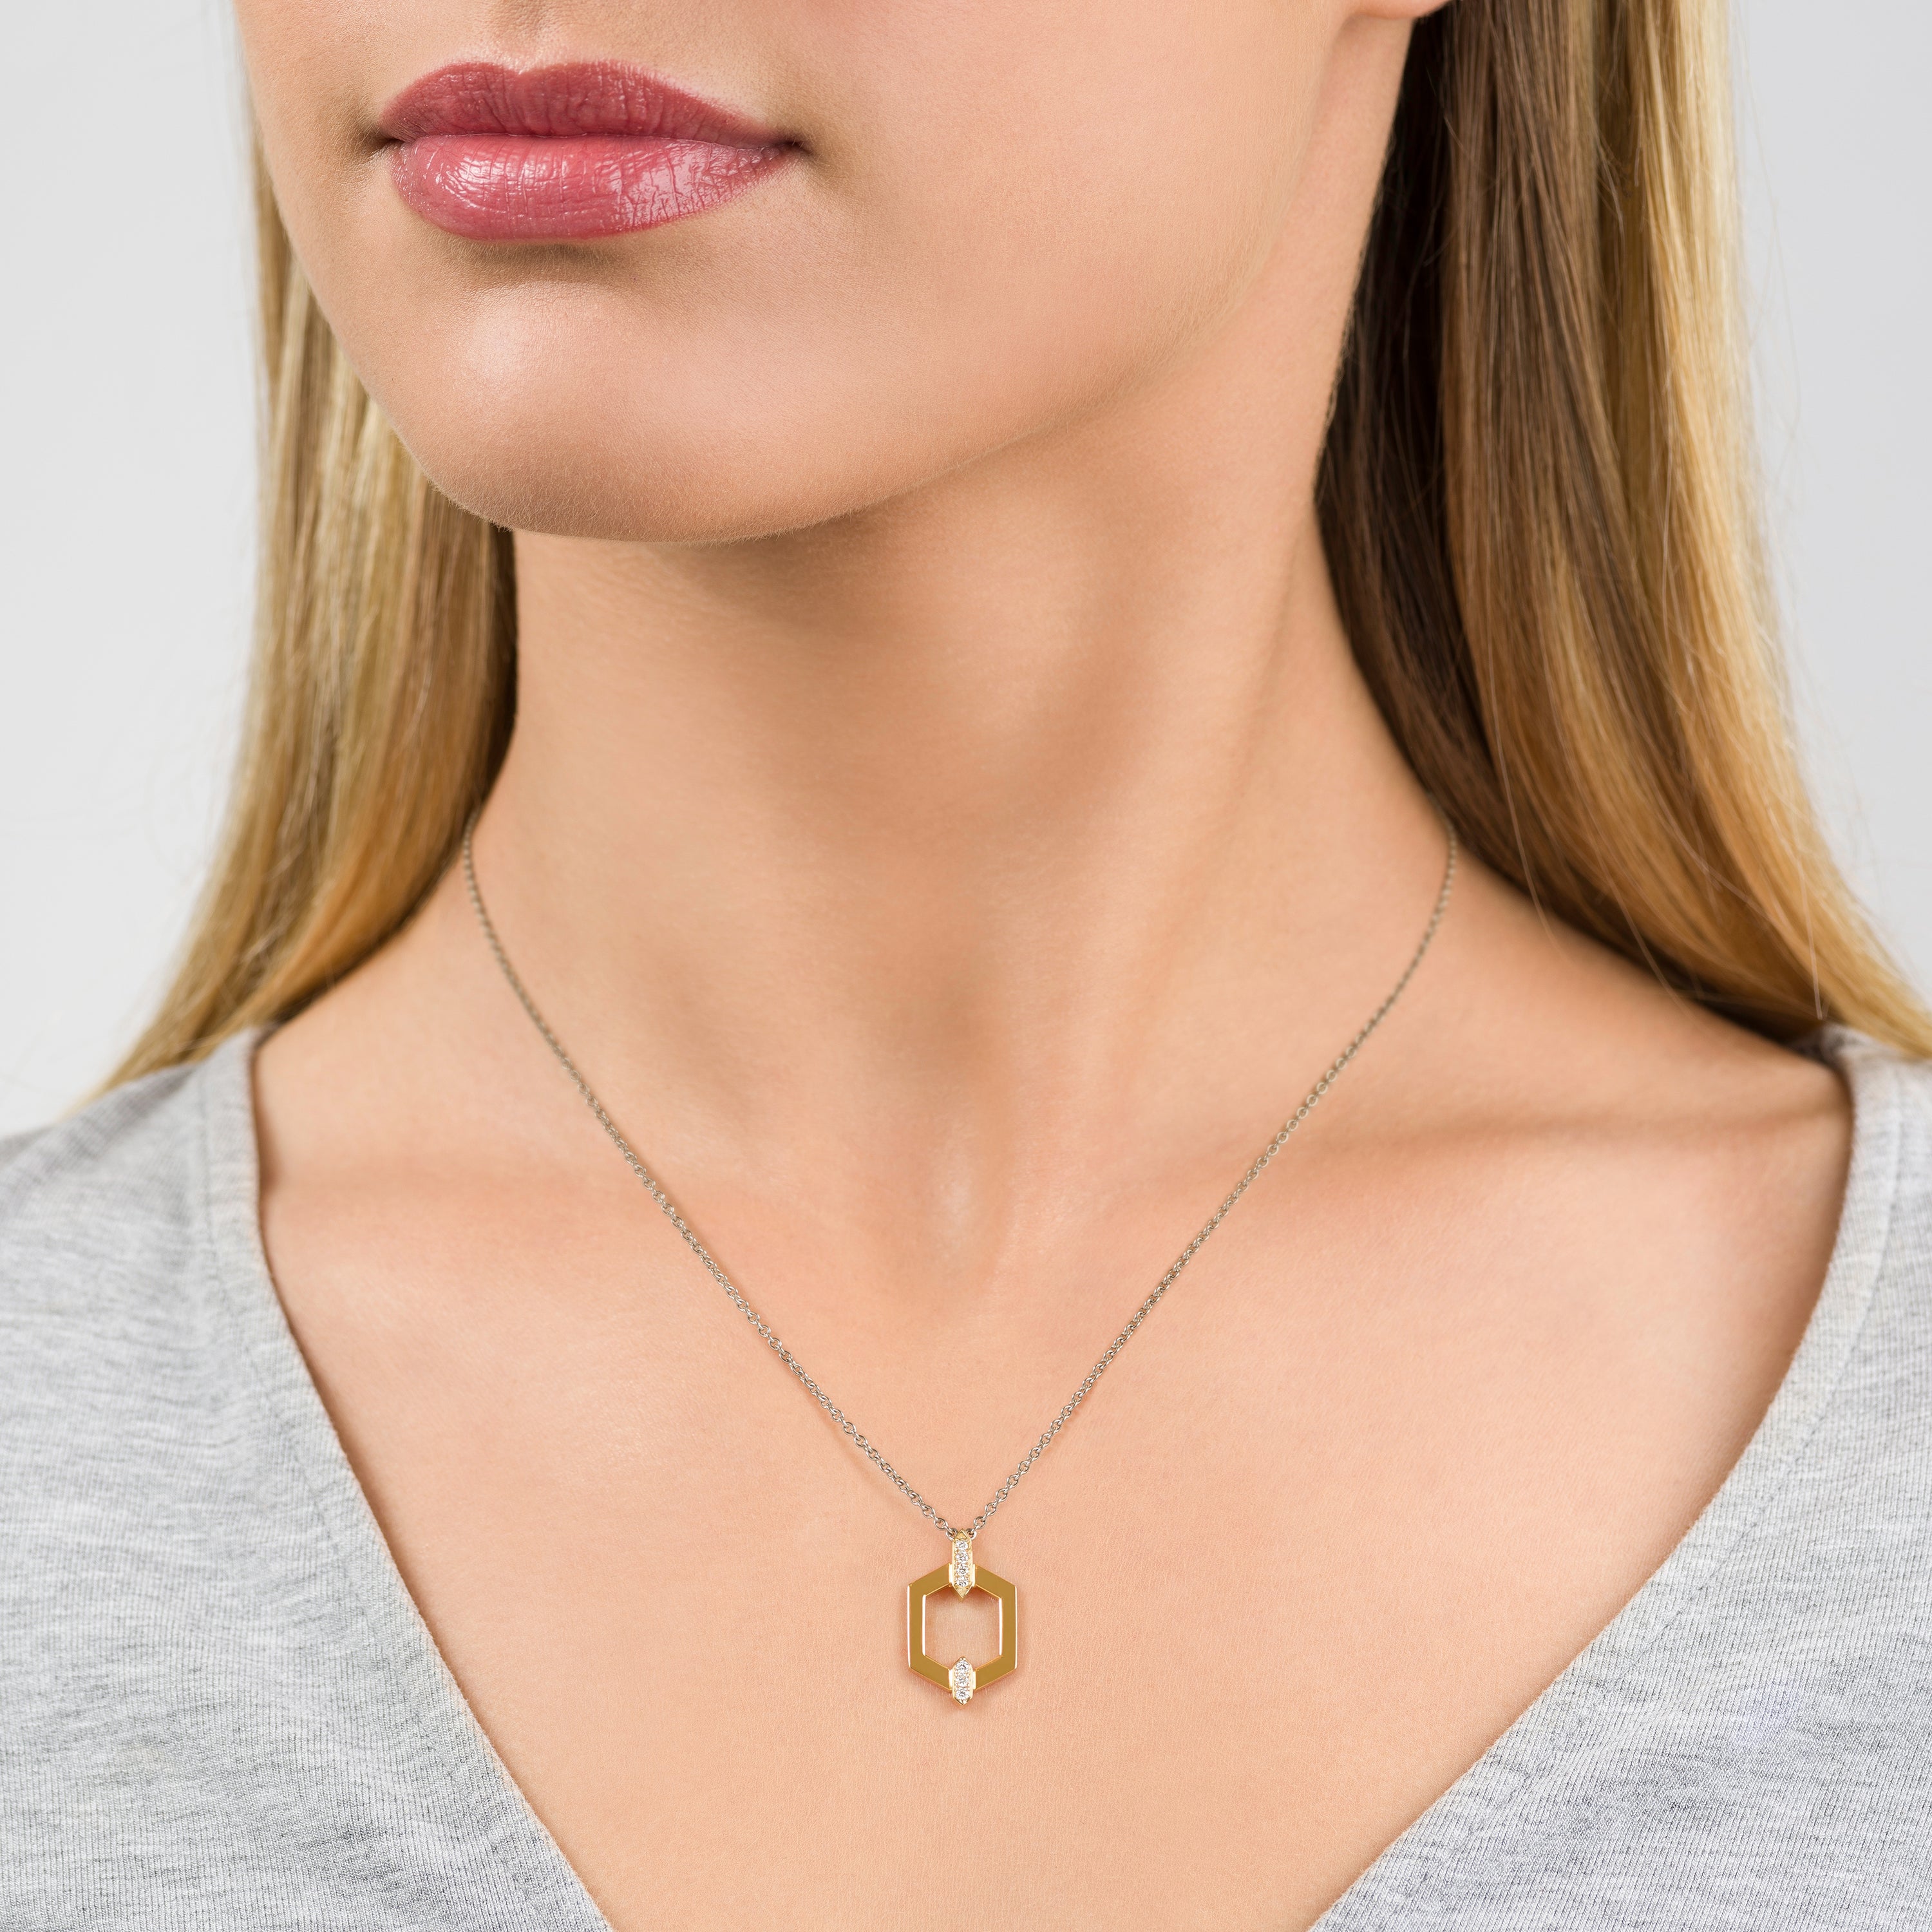 Nectar Collection Yellow Gold Pendant